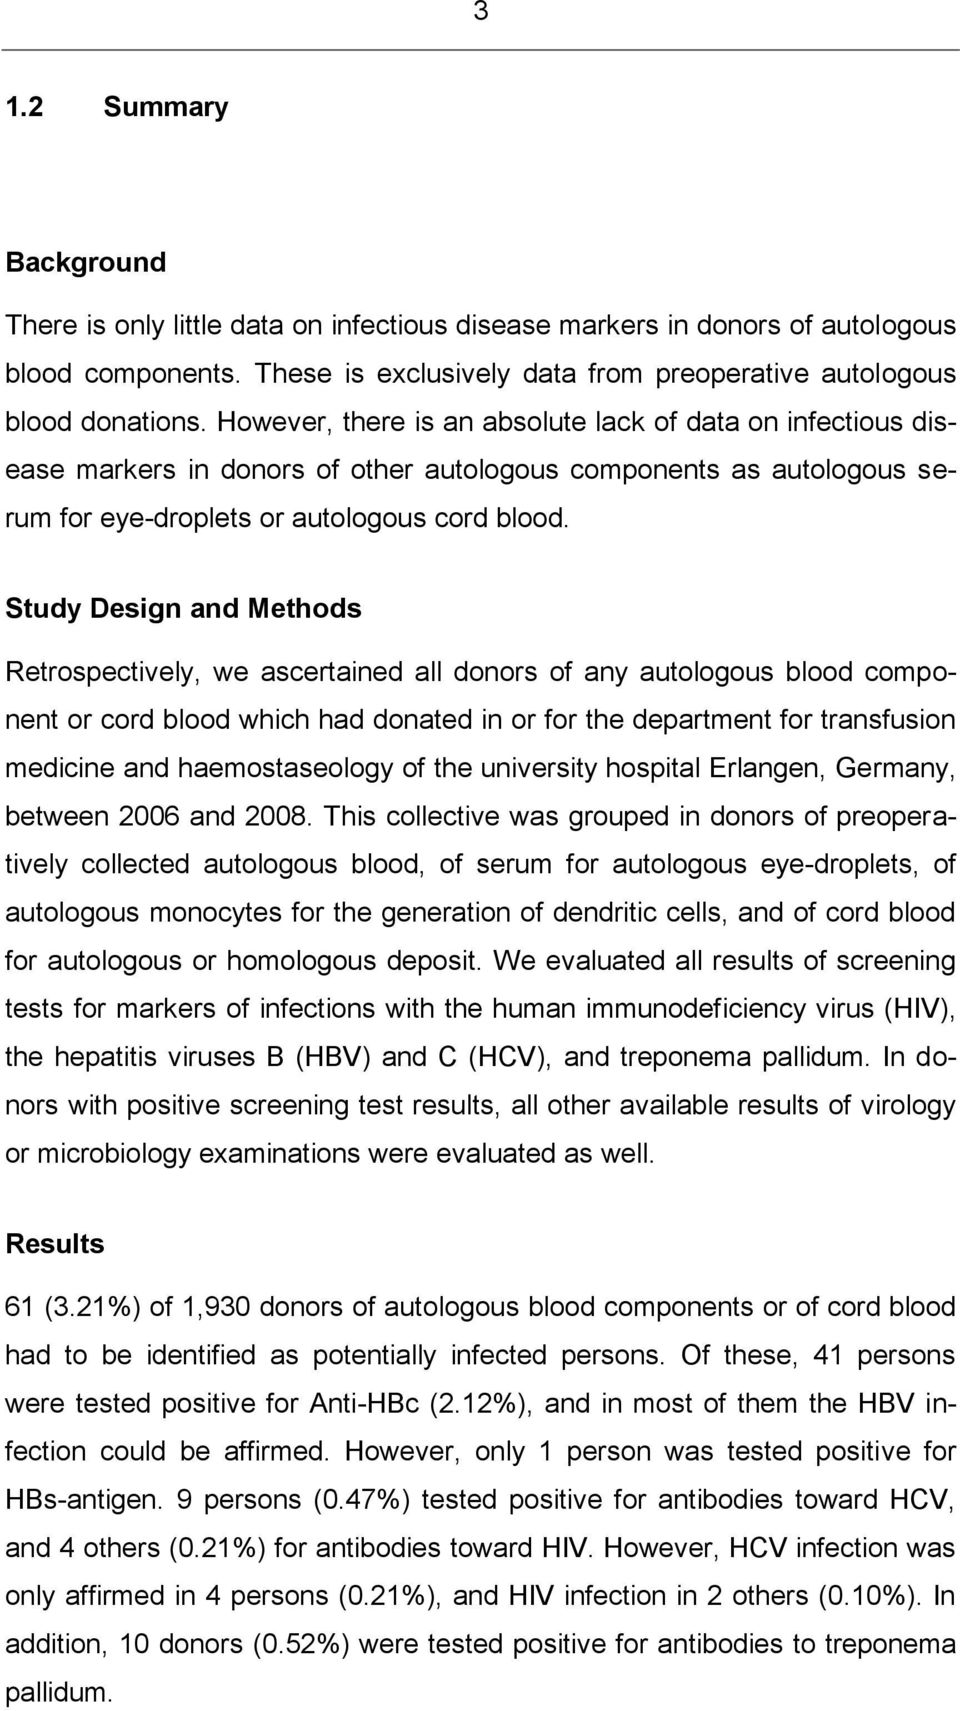 Study Design and Methods Retrospectively, we ascertained all donors of any autologous blood component or cord blood which had donated in or for the department for transfusion medicine and